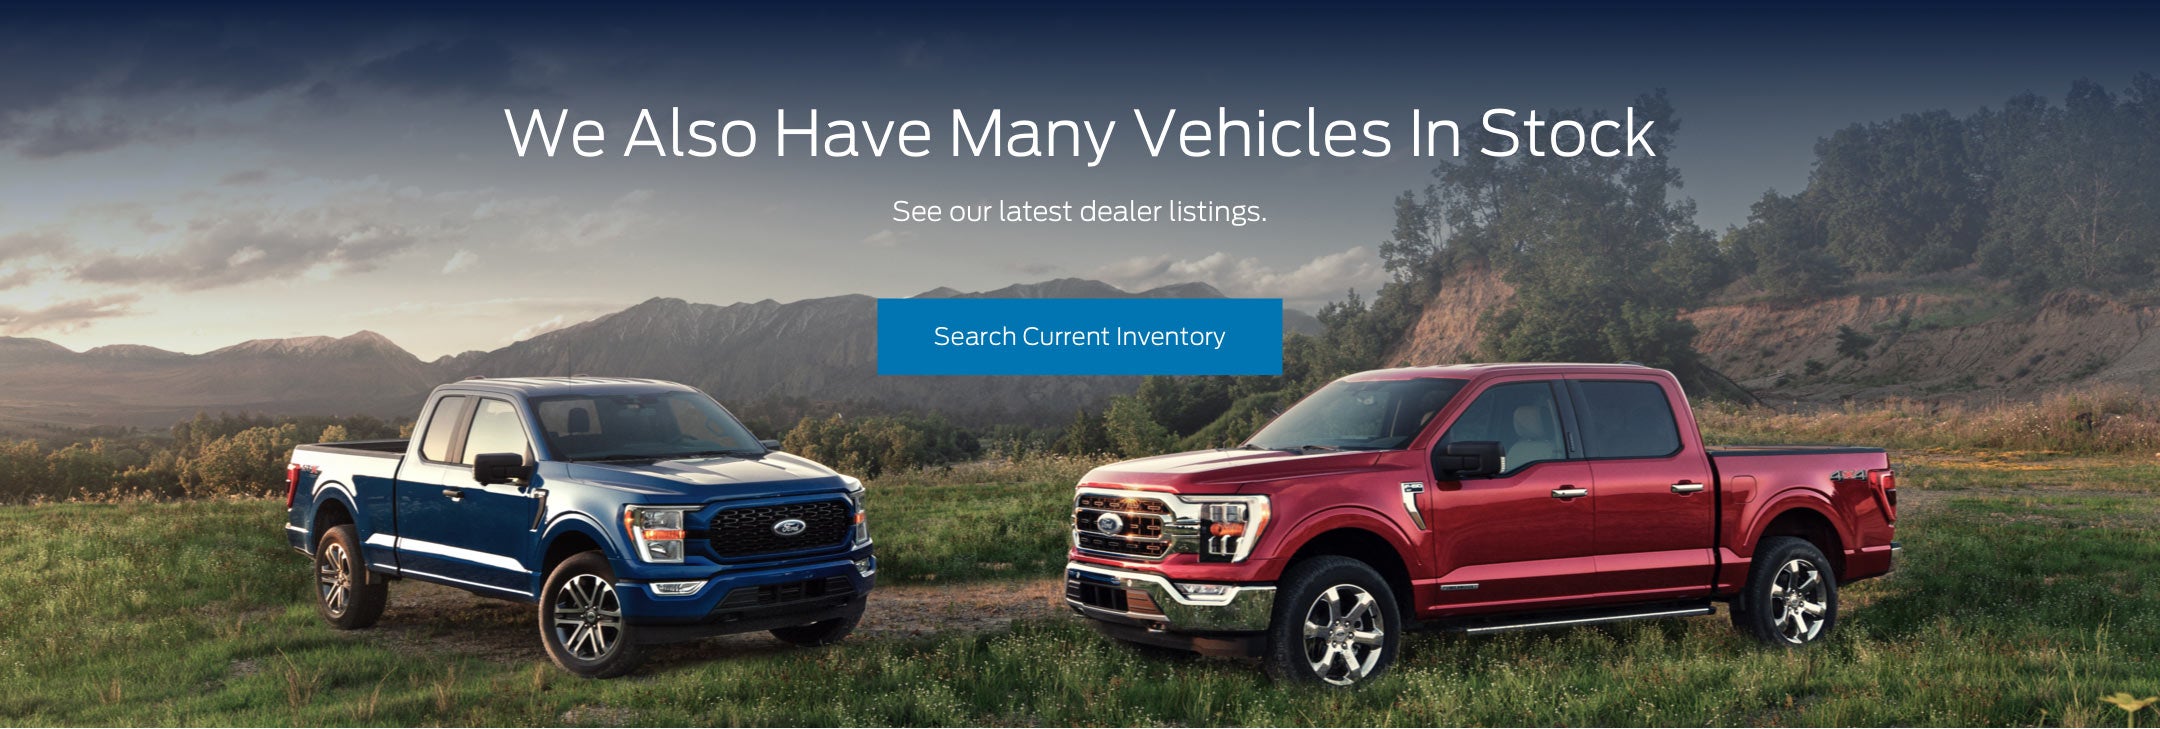 Ford vehicles in stock | Coconut Point Ford in Estero FL